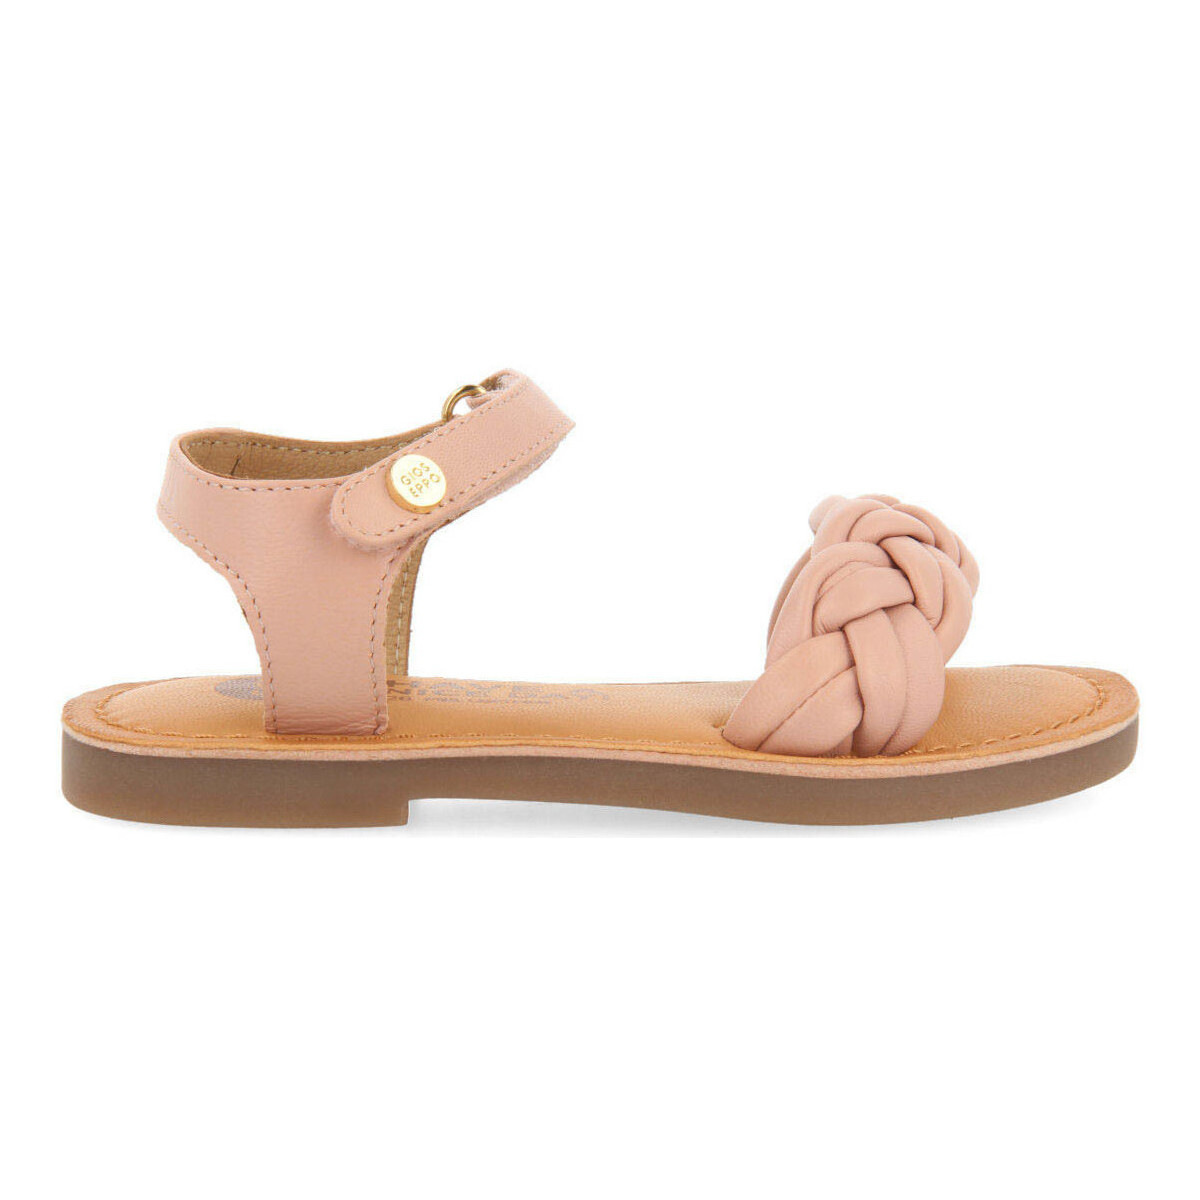 Chaussures Fille Sandales et Nu-pieds Gioseppo ingai Rose